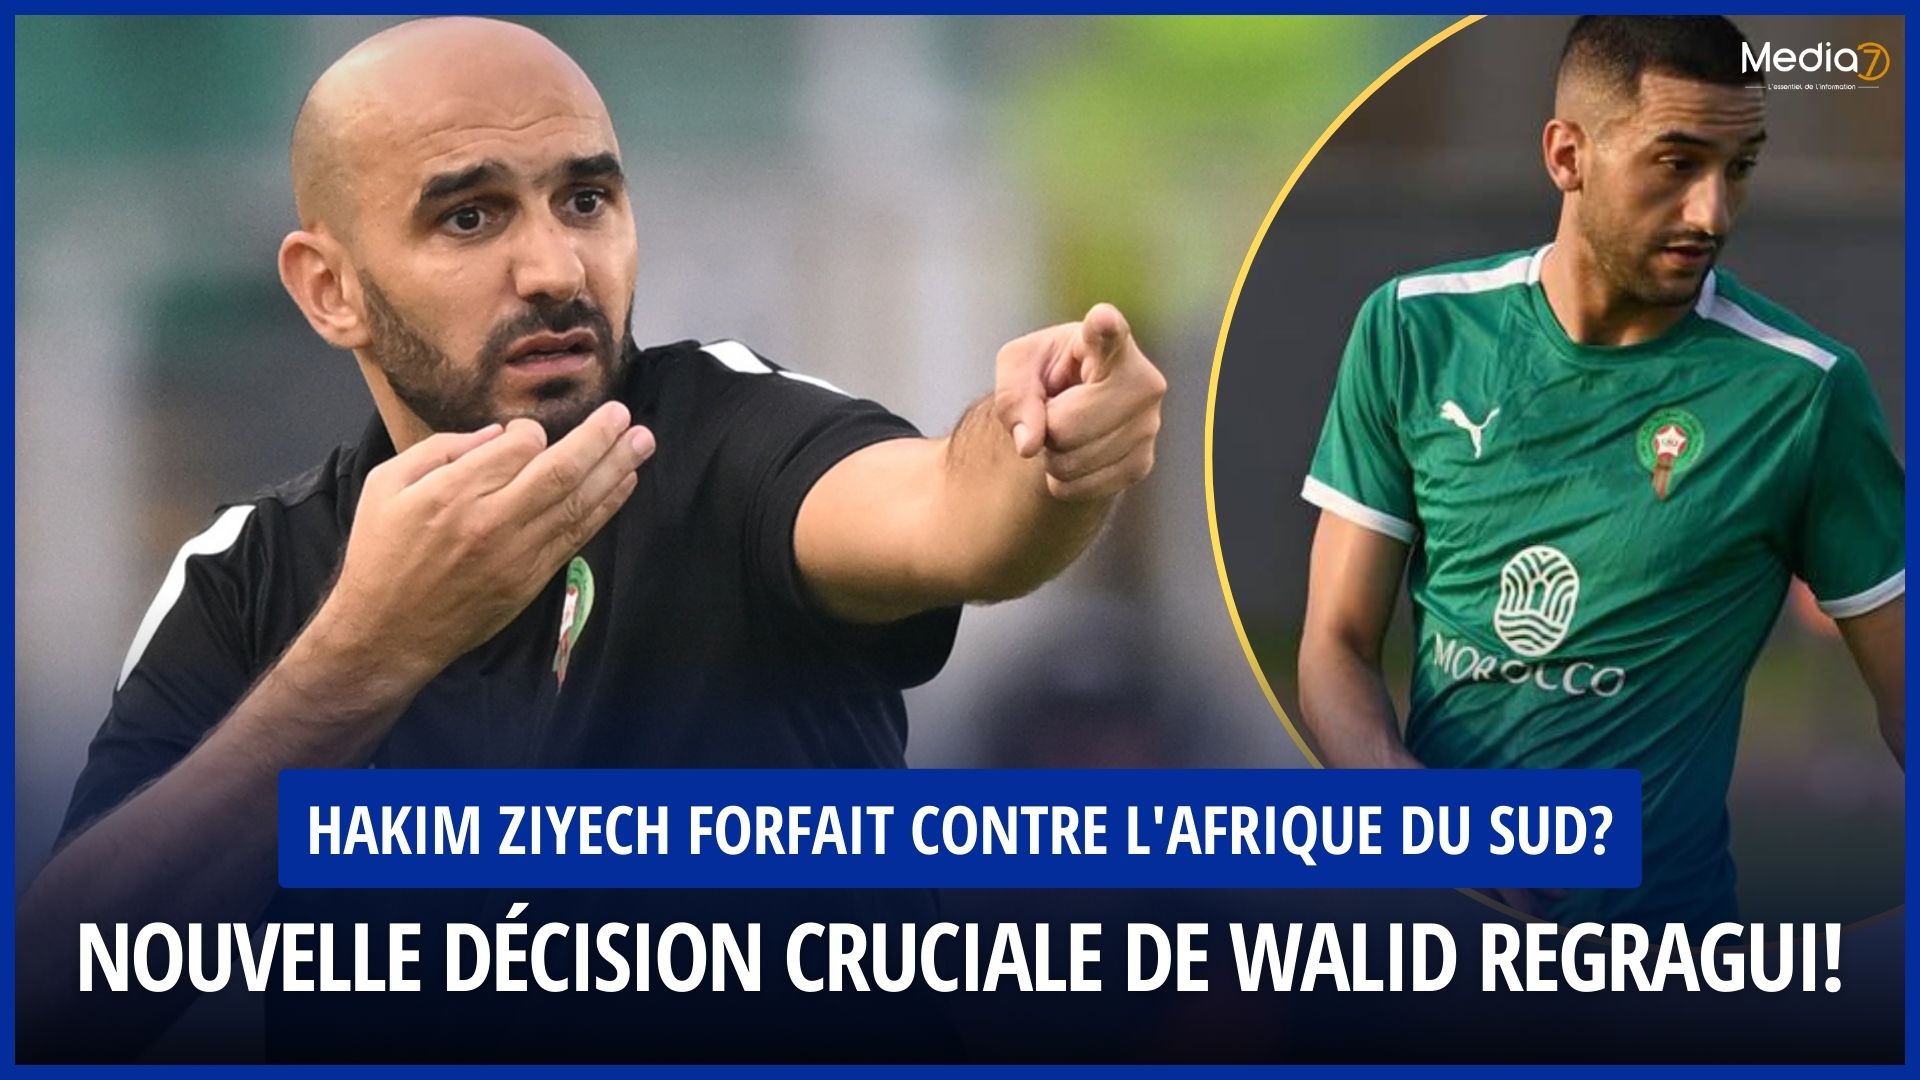 Hakim Ziyech out against South Africa? New crucial decision from Walid Regragui! - Media7